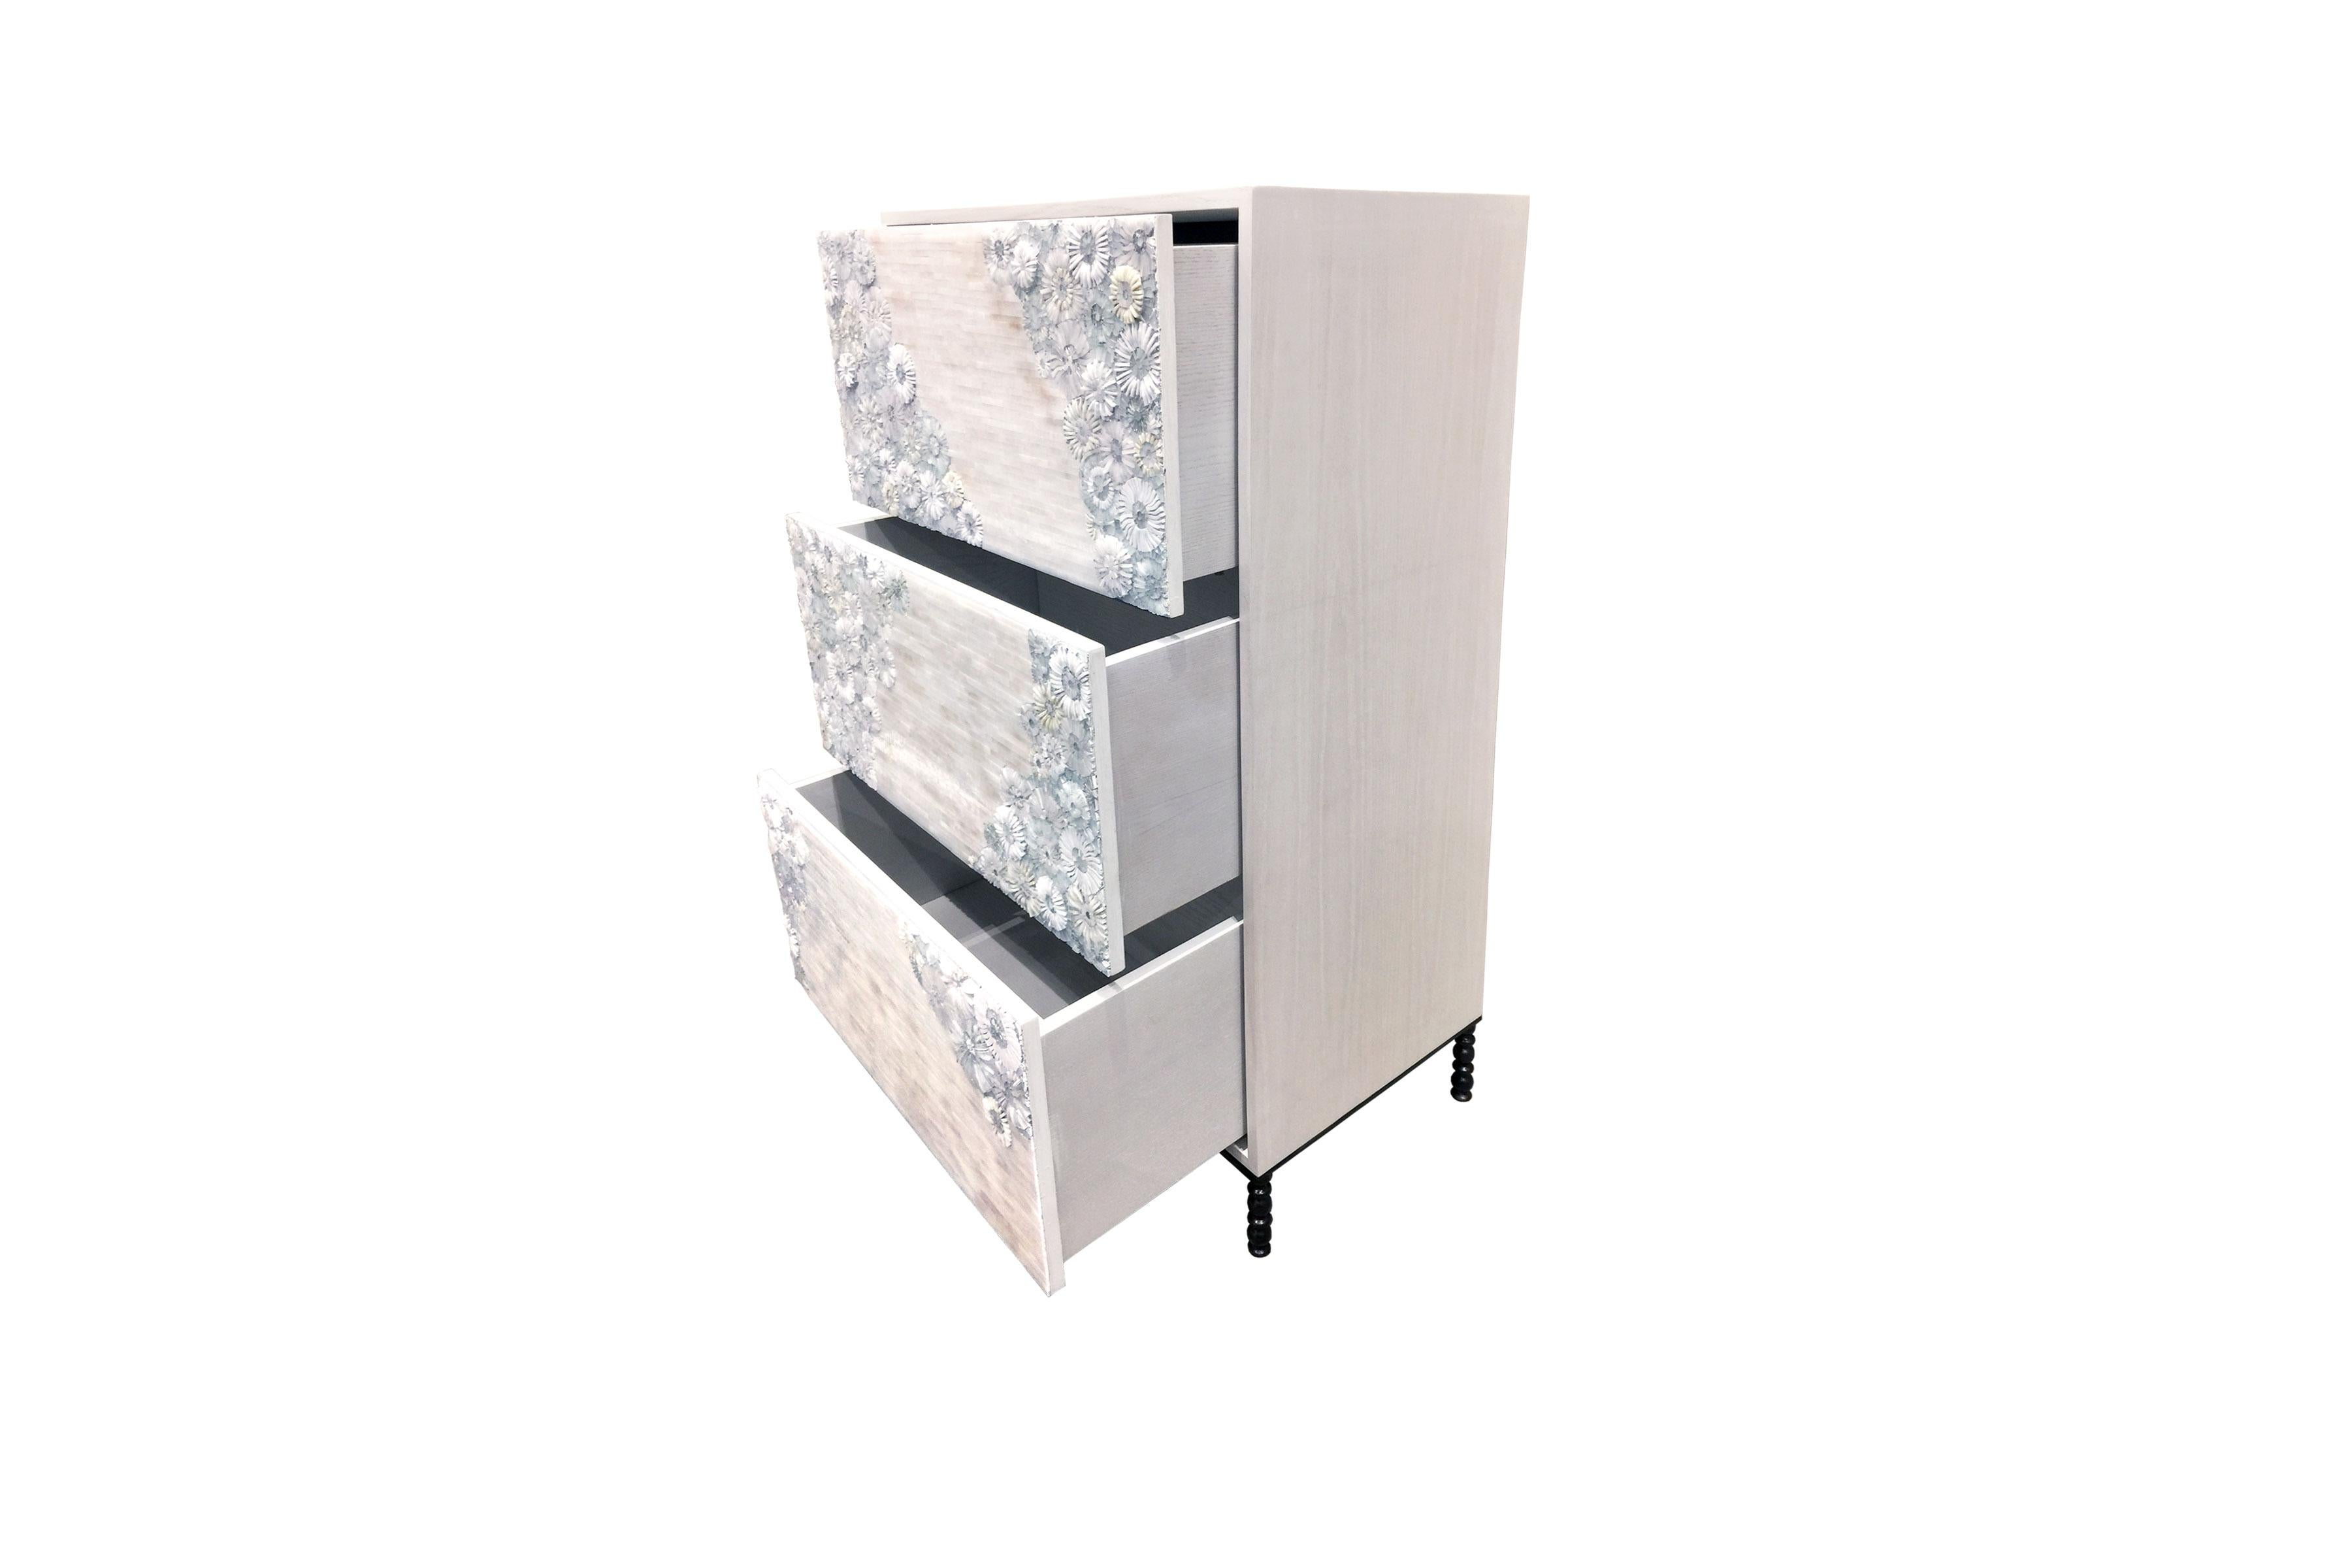 The blossom chest of drawers by Ercole Home has a 3-drawer front, with washed white wood finish on oak.
Handcut glass mosaic in variety shades of white and ivory decorate the surface in blossom and stipe mosaic patterns.
The decorative metal base